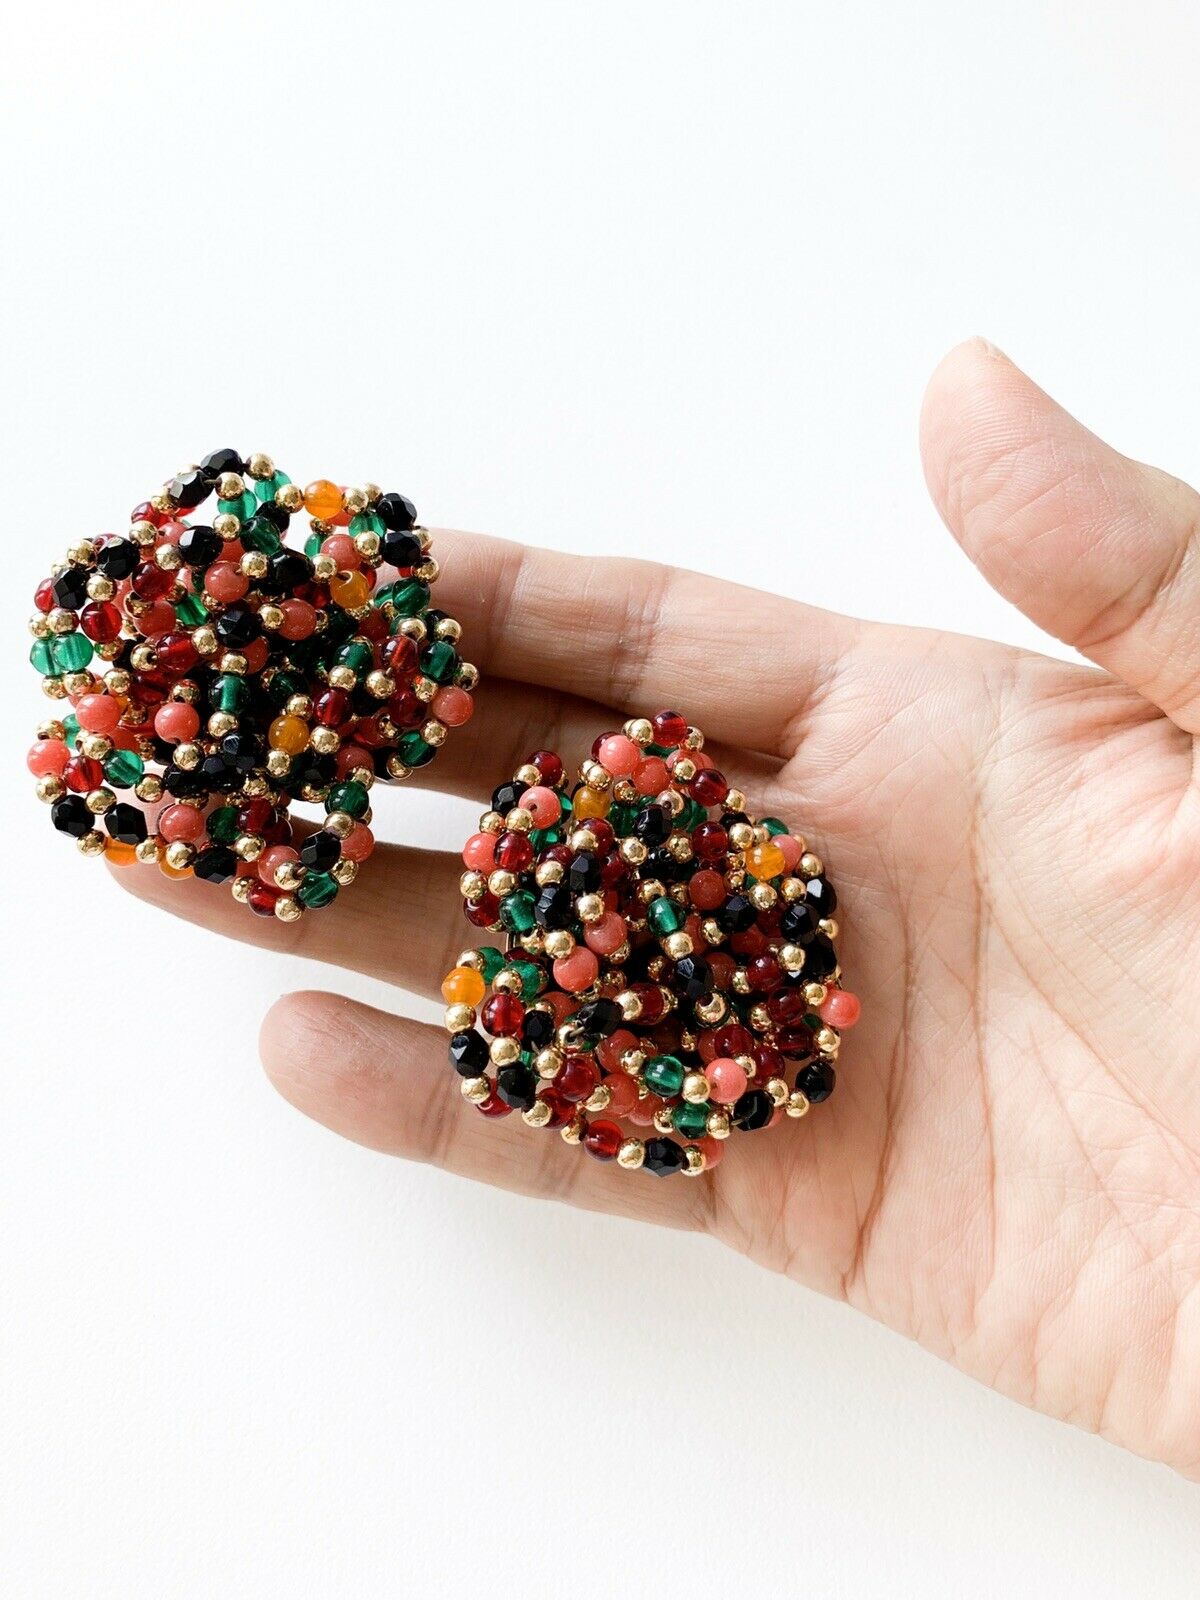 FERRE Beads Multi Color Beaded Massive Earrings Made in Italy Vintage